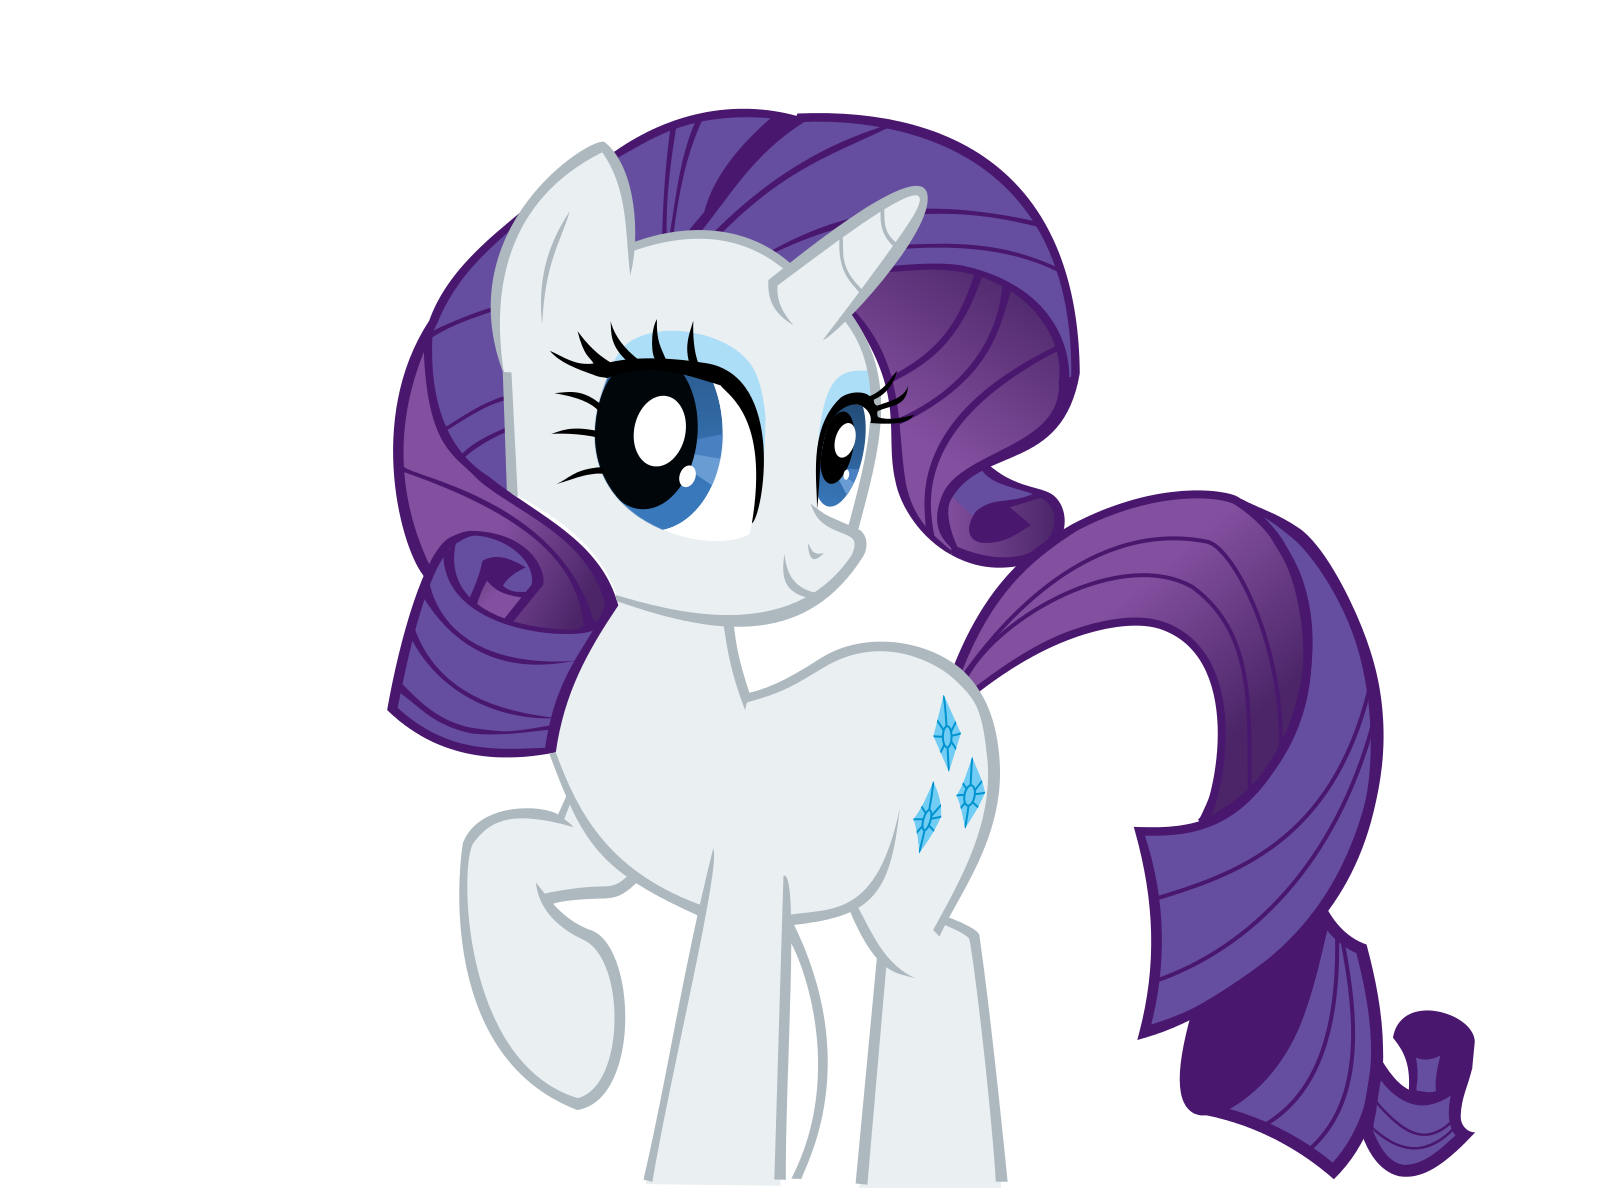 rarity___opening_by_derant-d5bbvgu.png